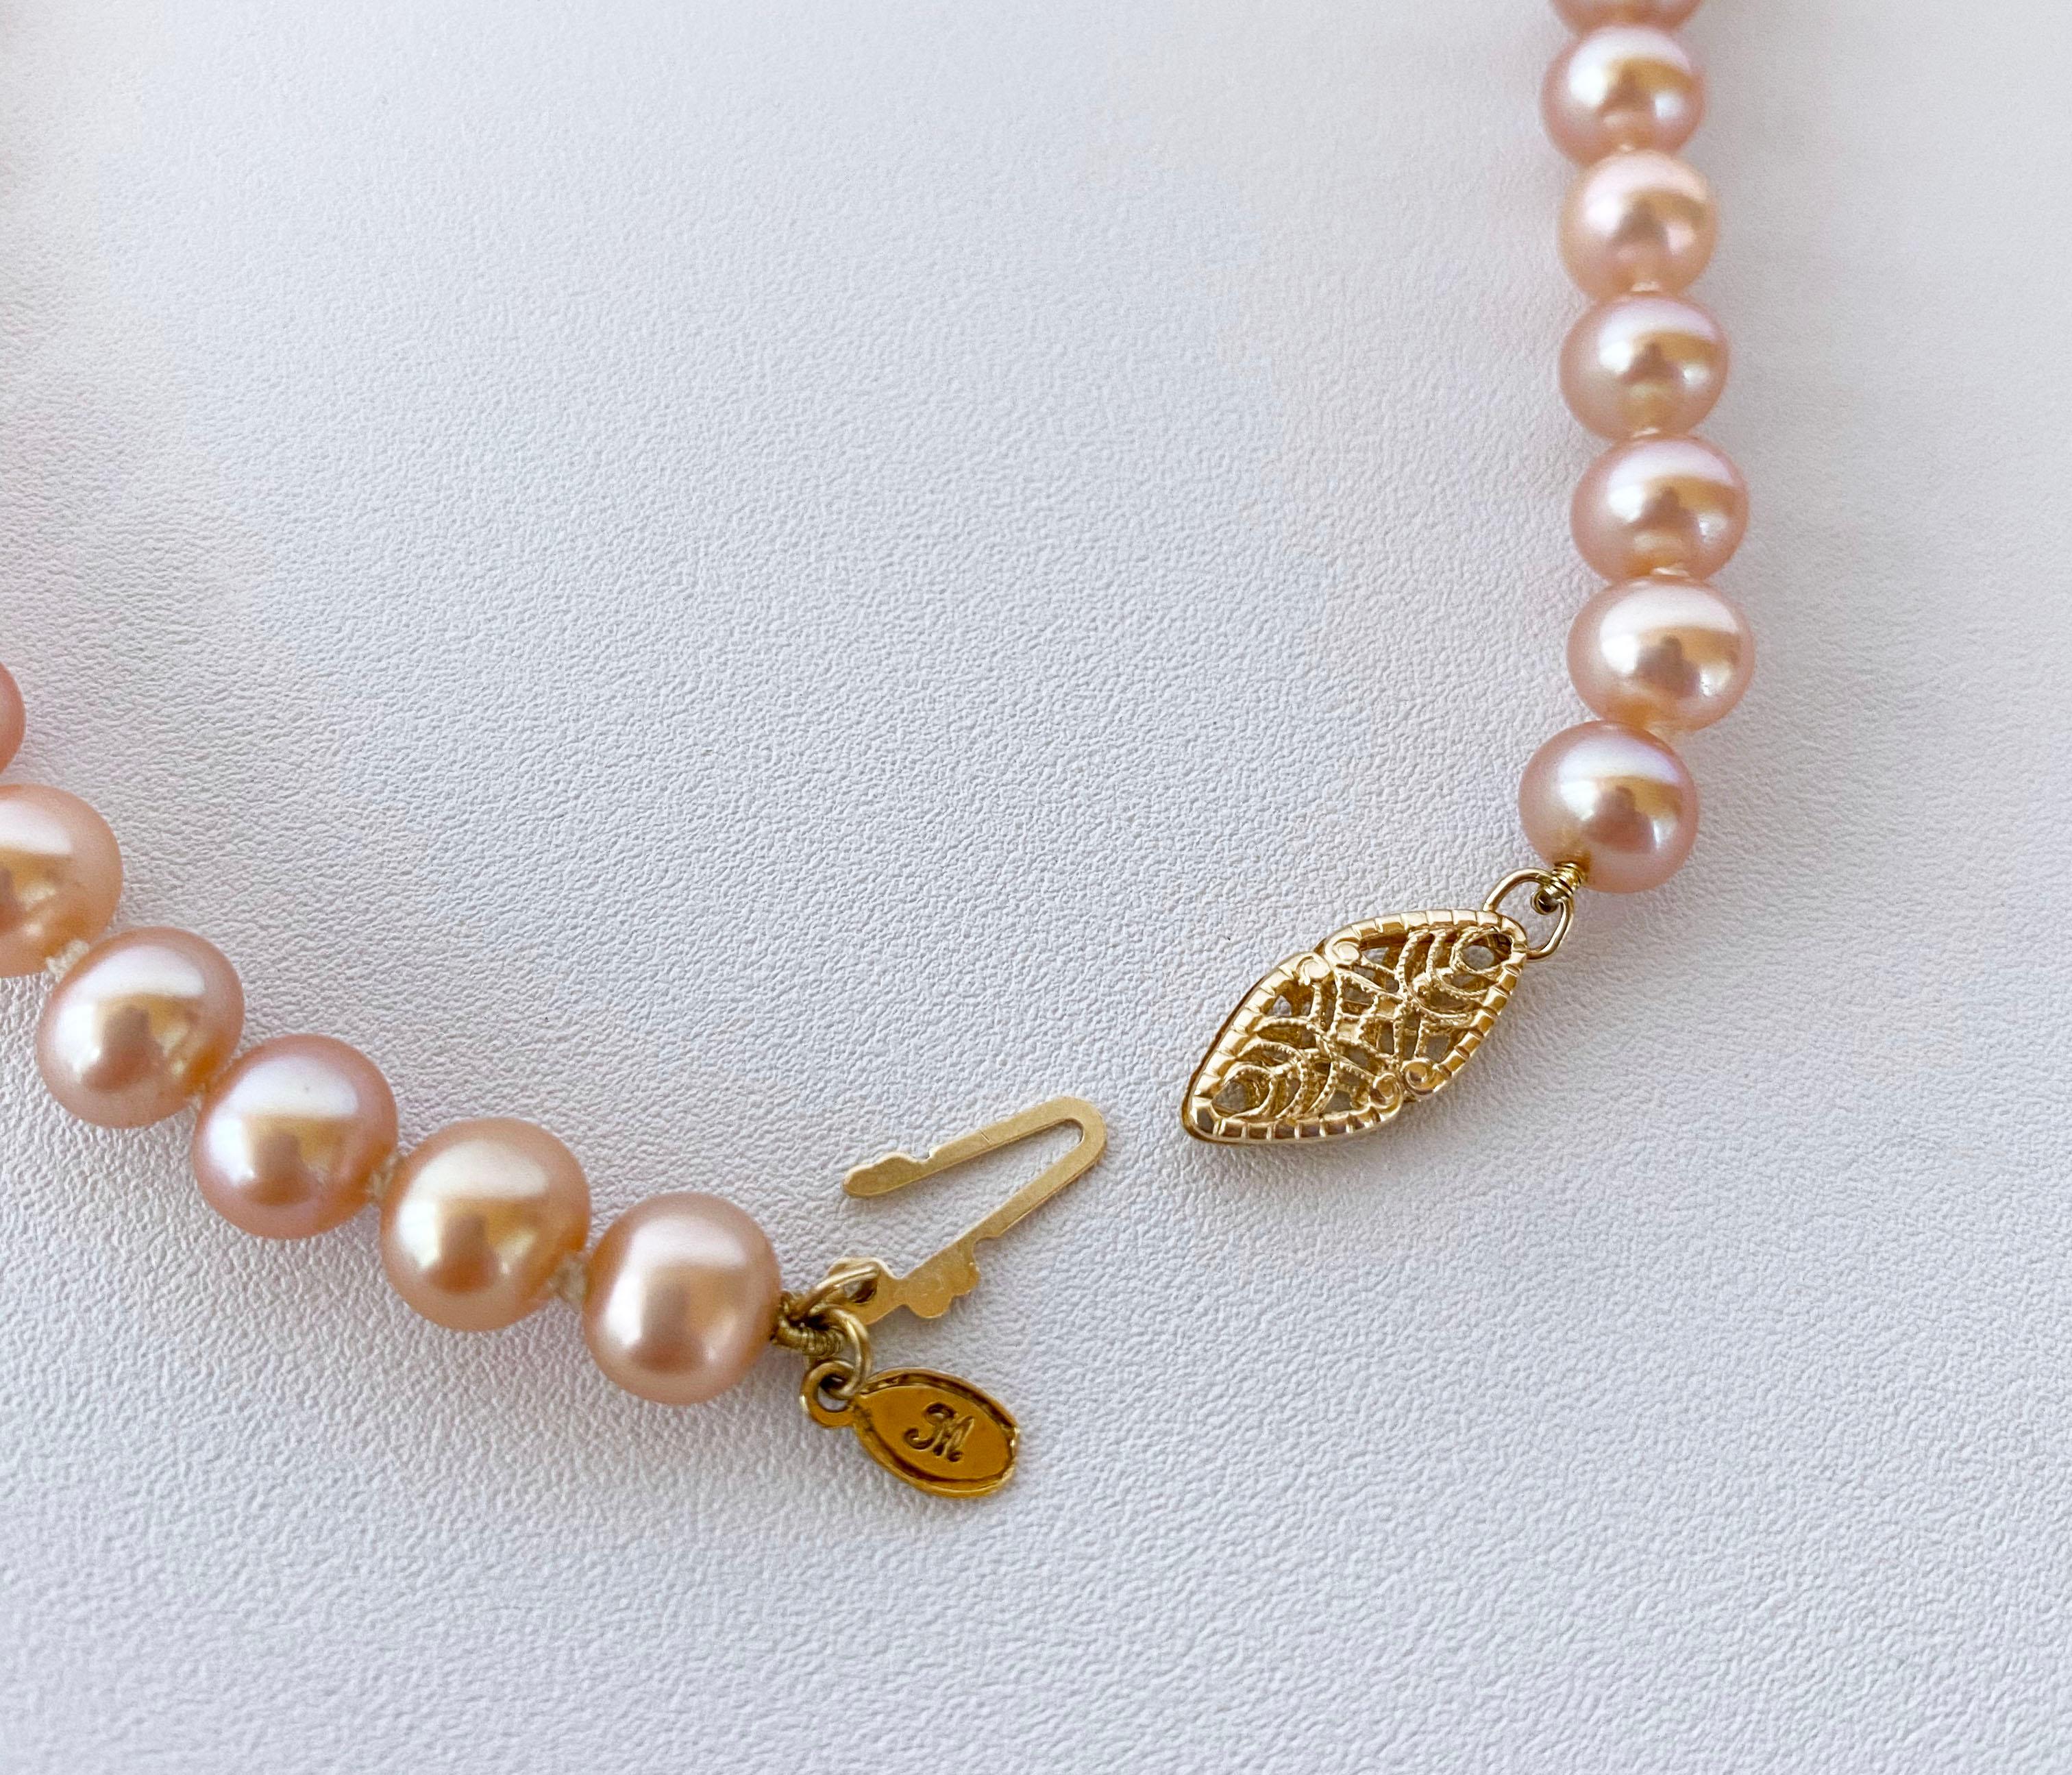 Bead Marina J. Pink Pearl Necklace with 14k Yellow Gold Filigree Clasp For Sale